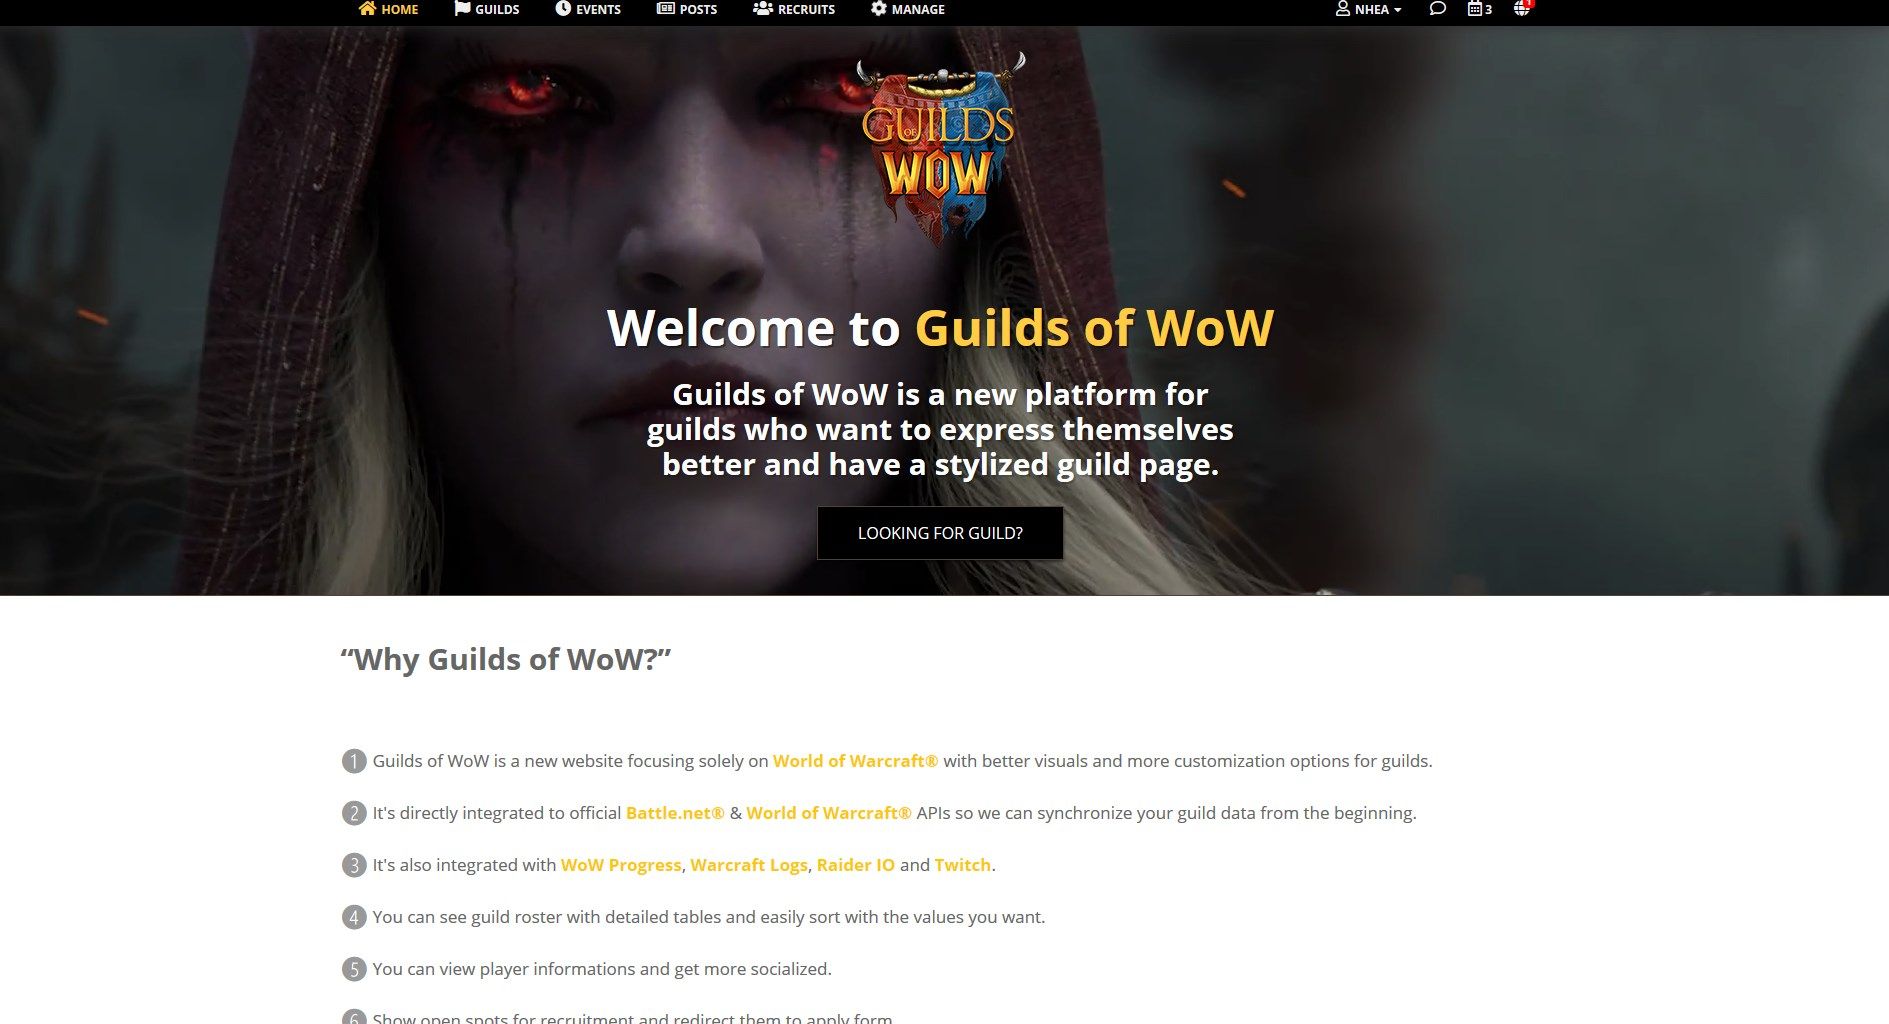 Guilds of WoW